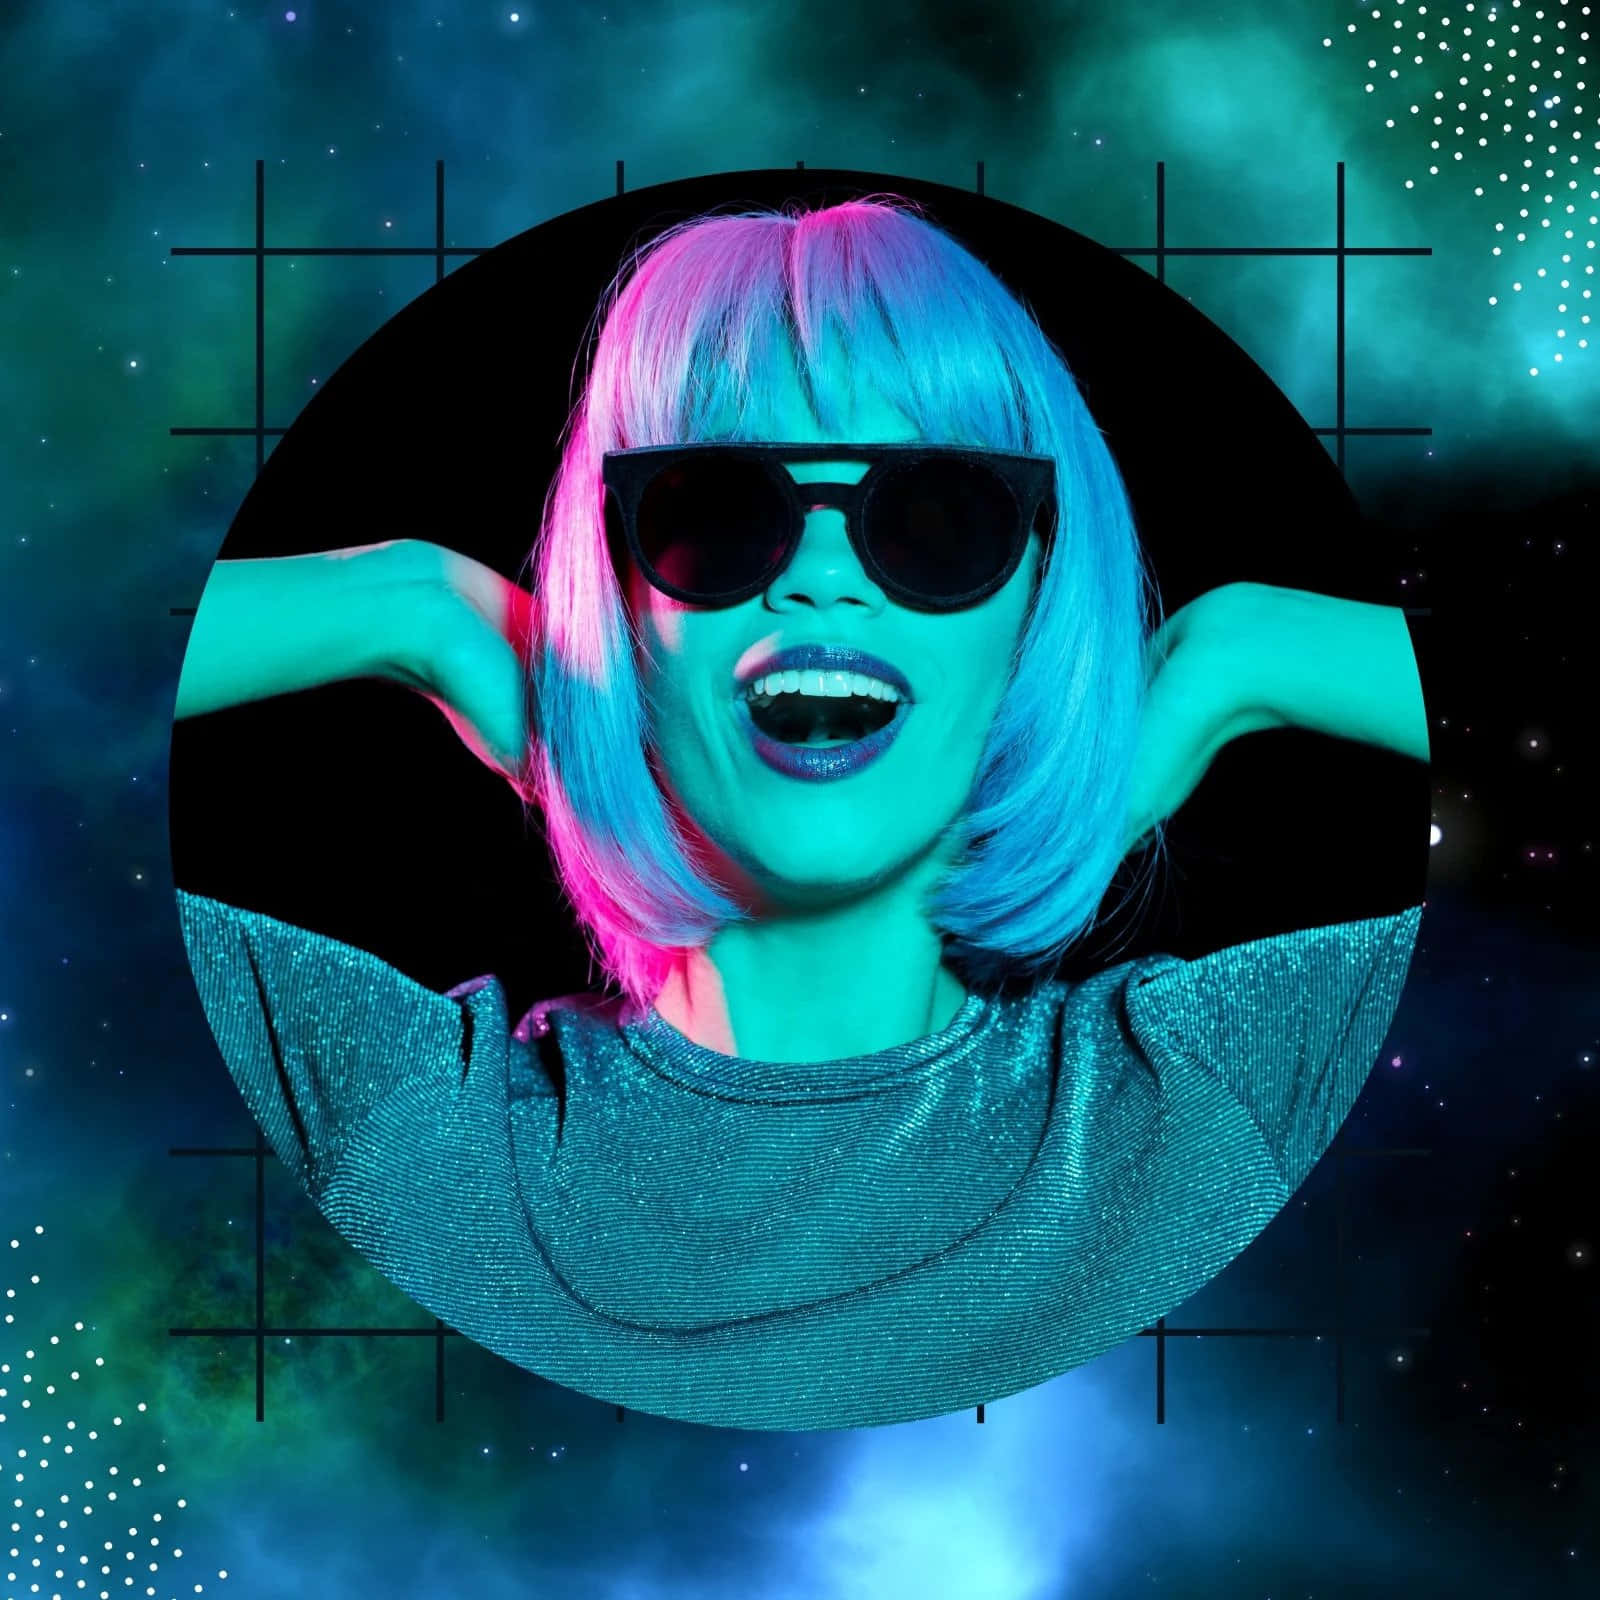 A Woman With Pink Hair And Sunglasses Is Smiling In Front Of A Space Background